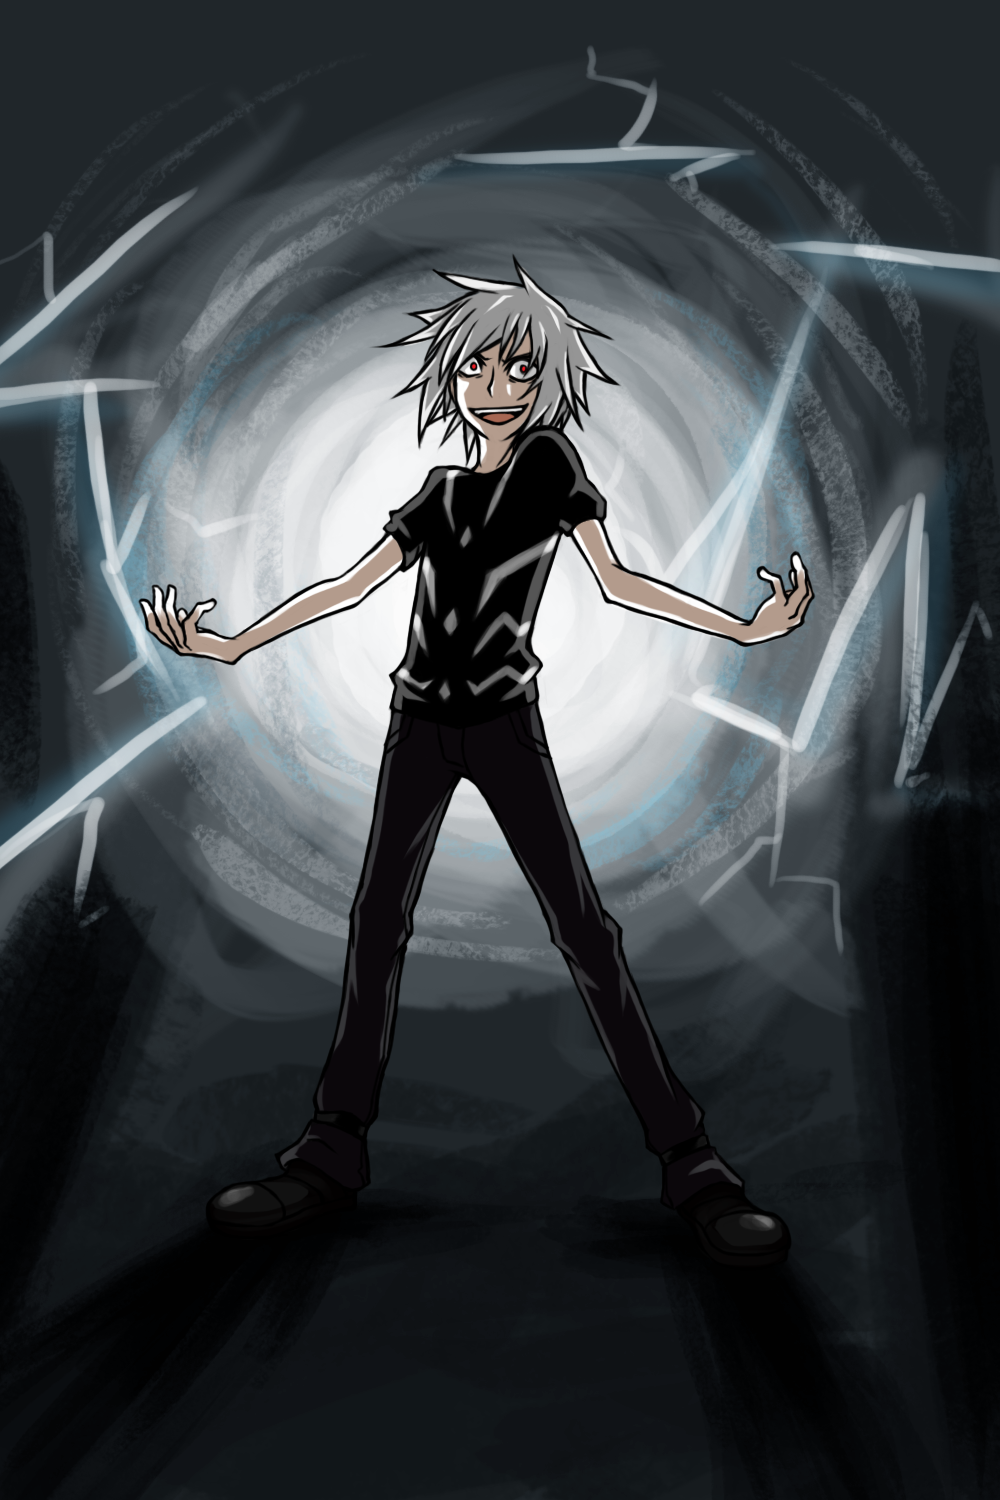 The Accelerator by resurie on DeviantArt